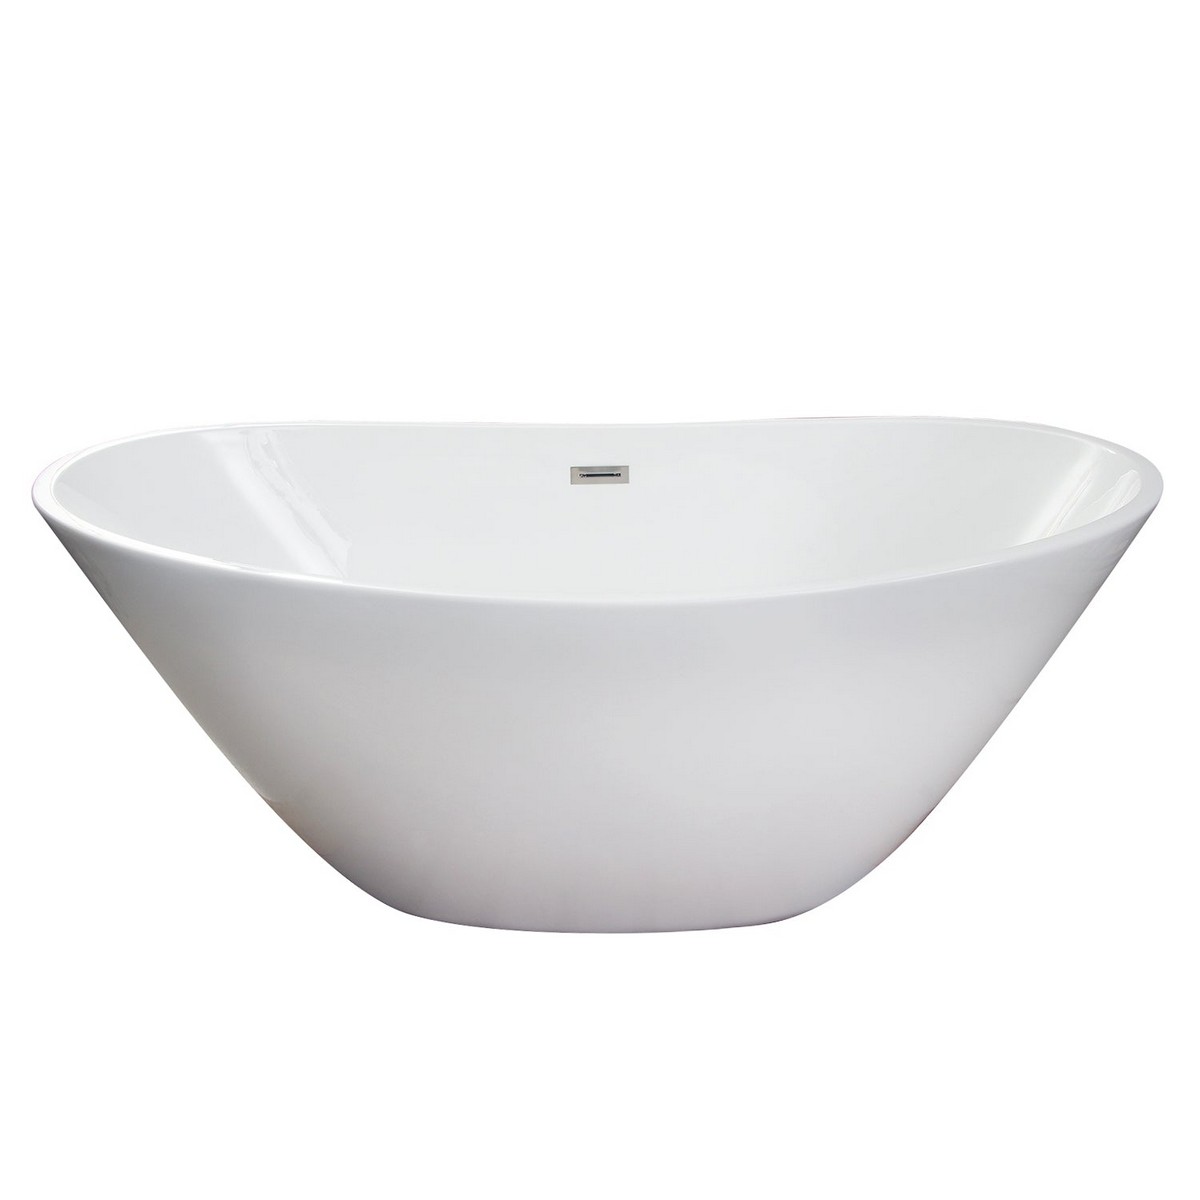 BARCLAY ATDSN68FIG NICKELBY 67 1/4 INCH ACRYLIC FREESTANDING OVAL SOAKING DOUBLE SLIPPER BATHTUB IN WHITE WITH INTEGRAL DRAIN AND OVERFLOW